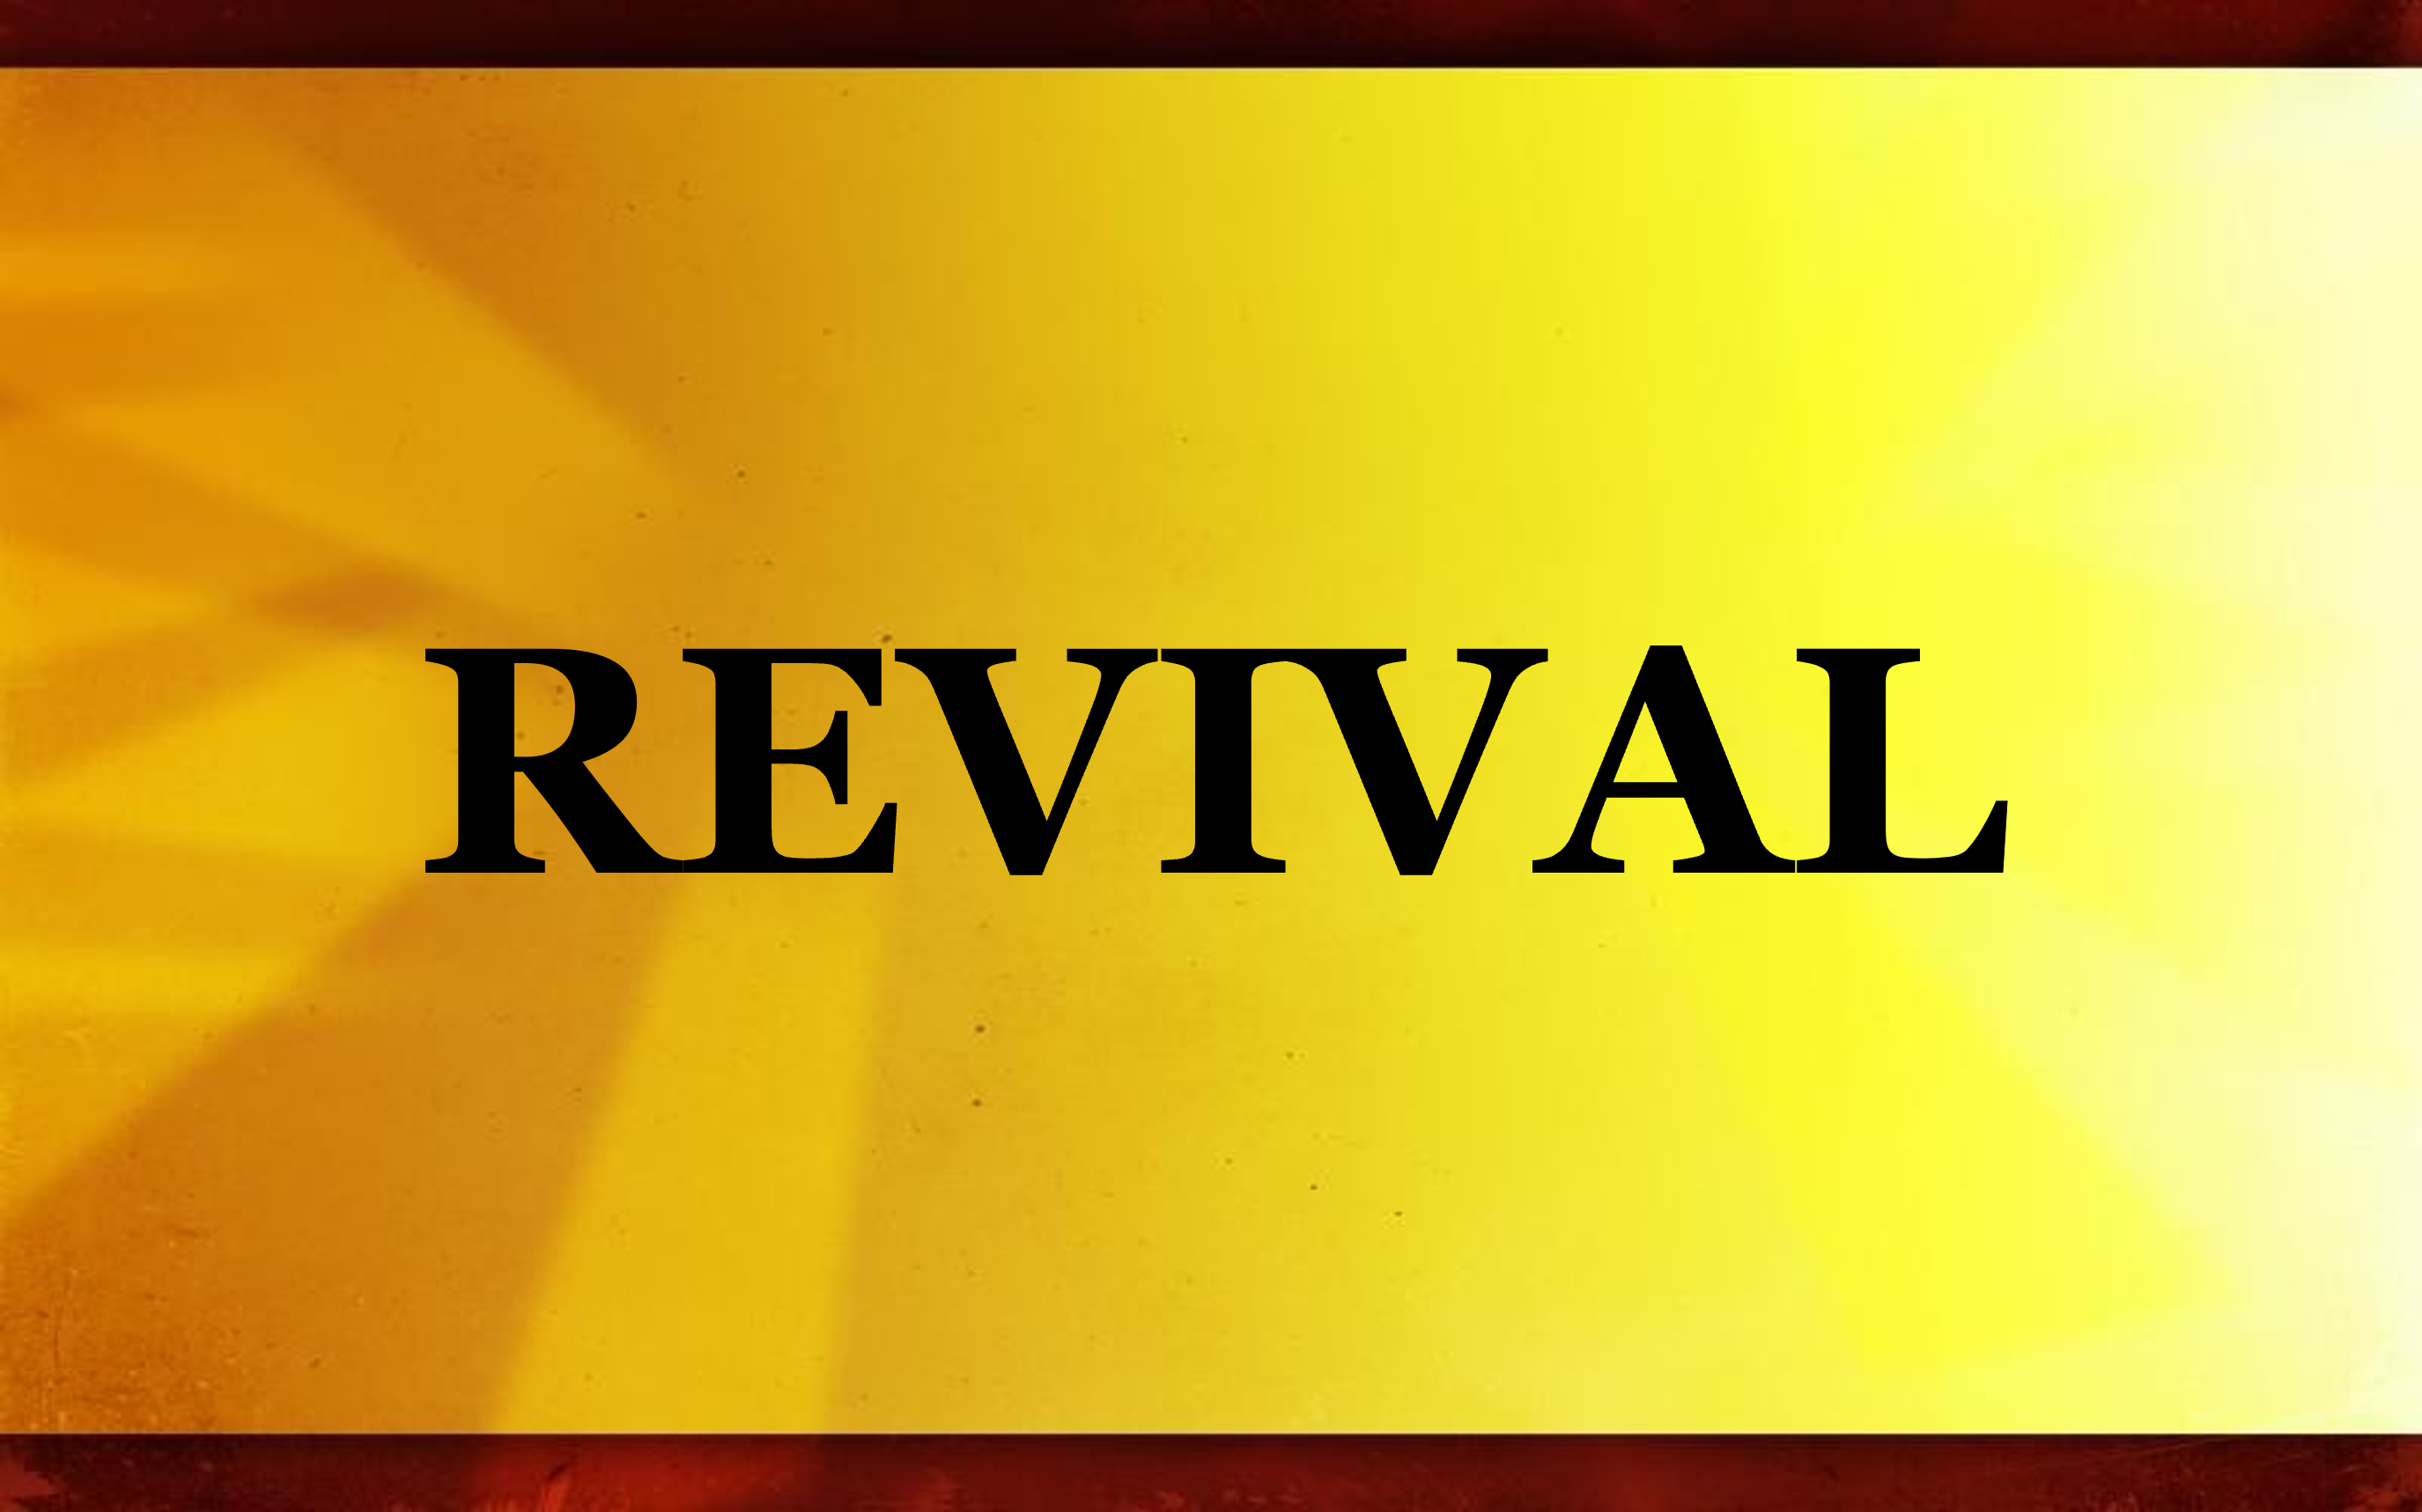 The People in Revival – Christ Life Ministries